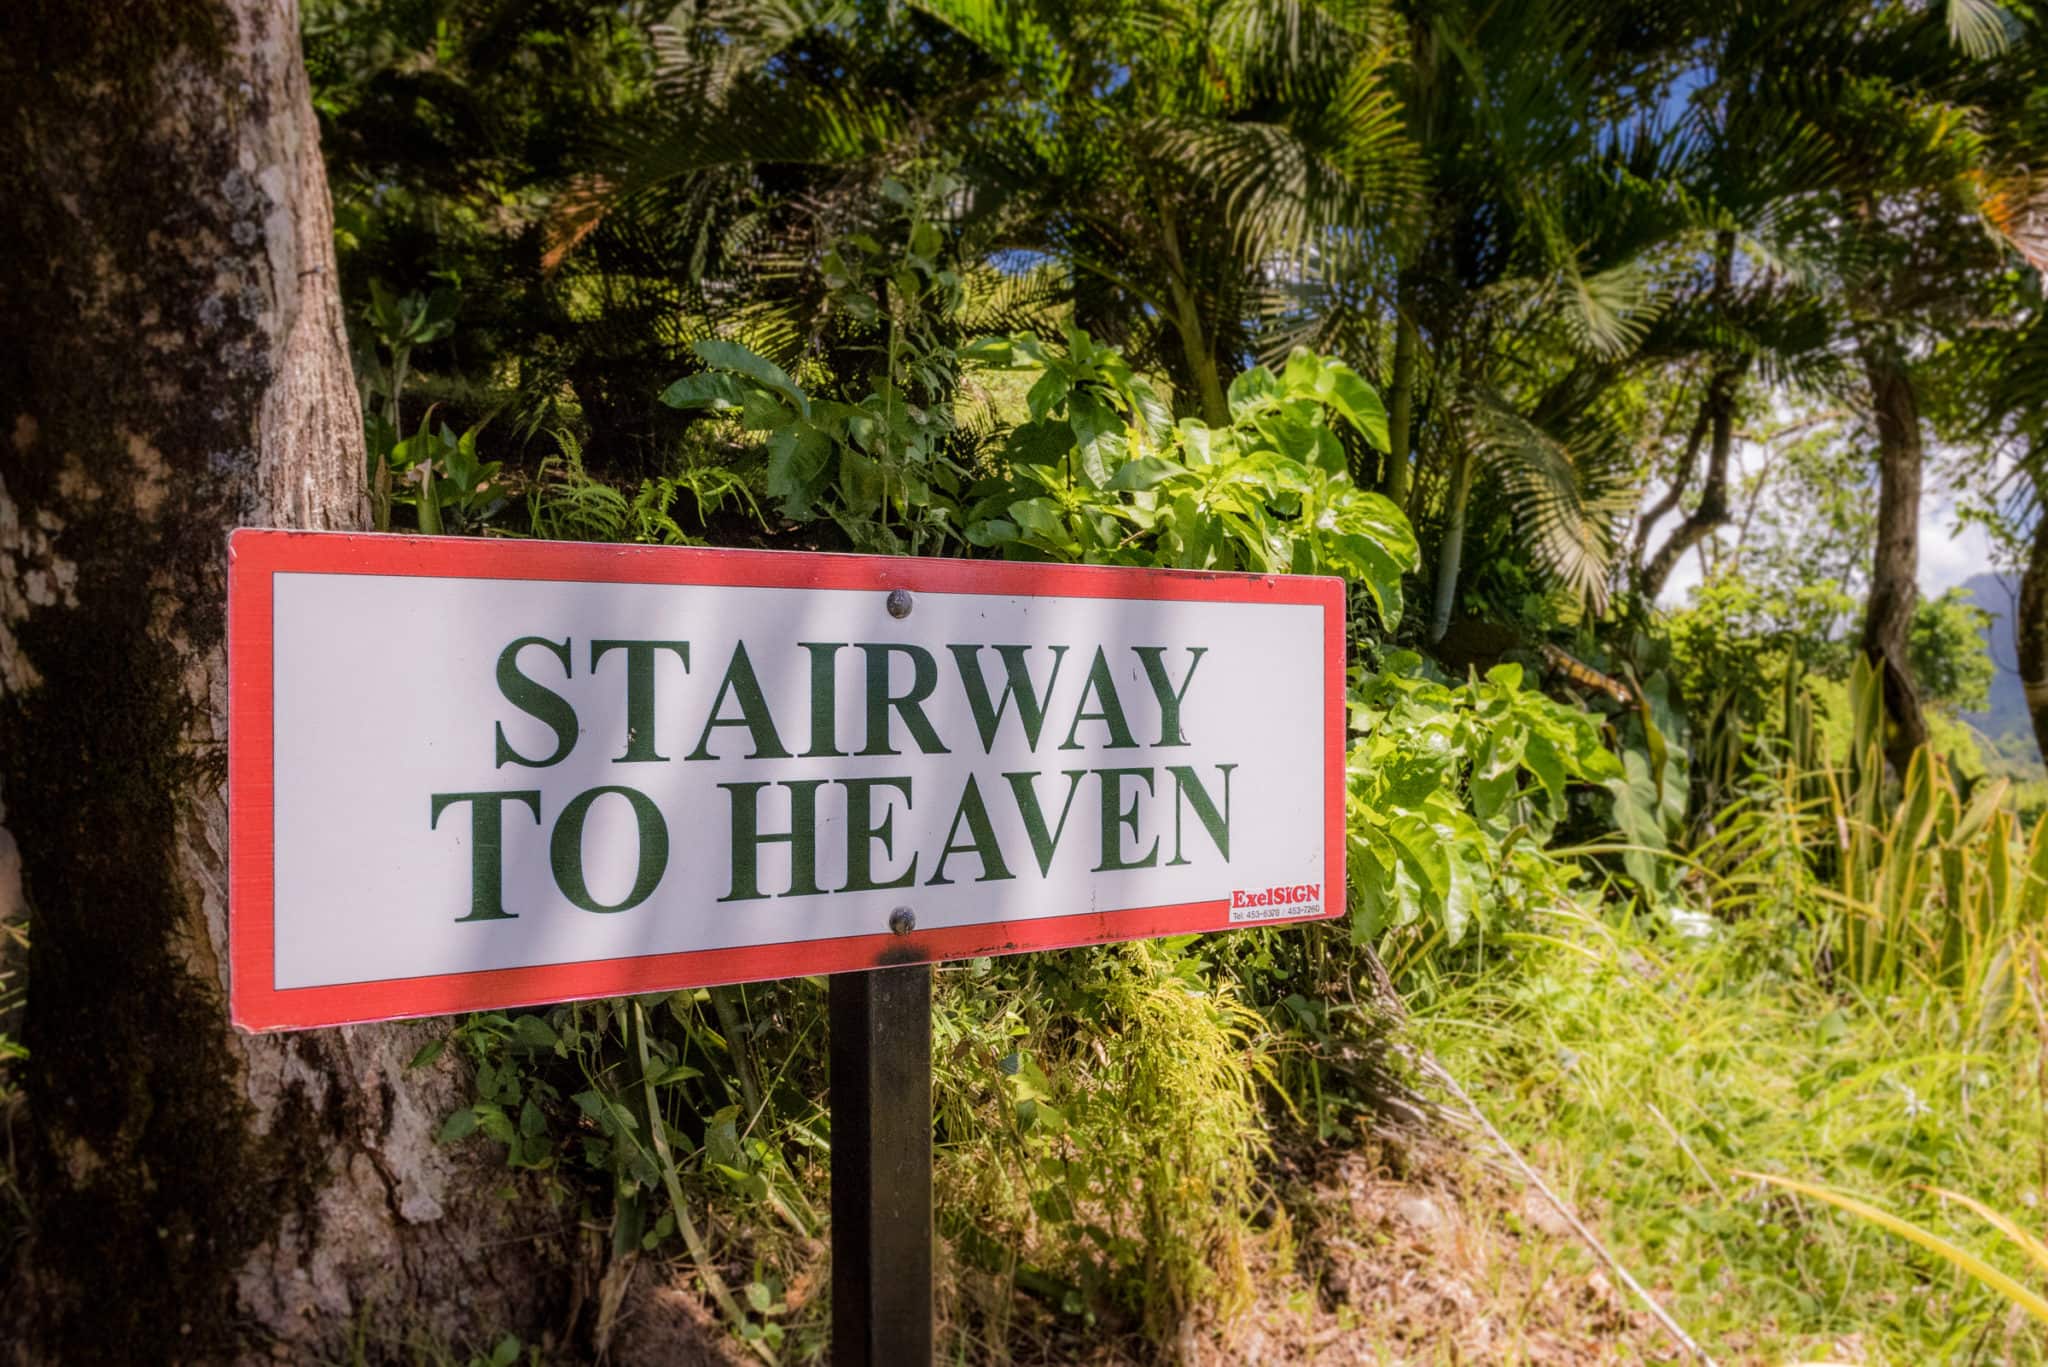 Tet Paul Stairway to Heaven sign by Patrick Bennett